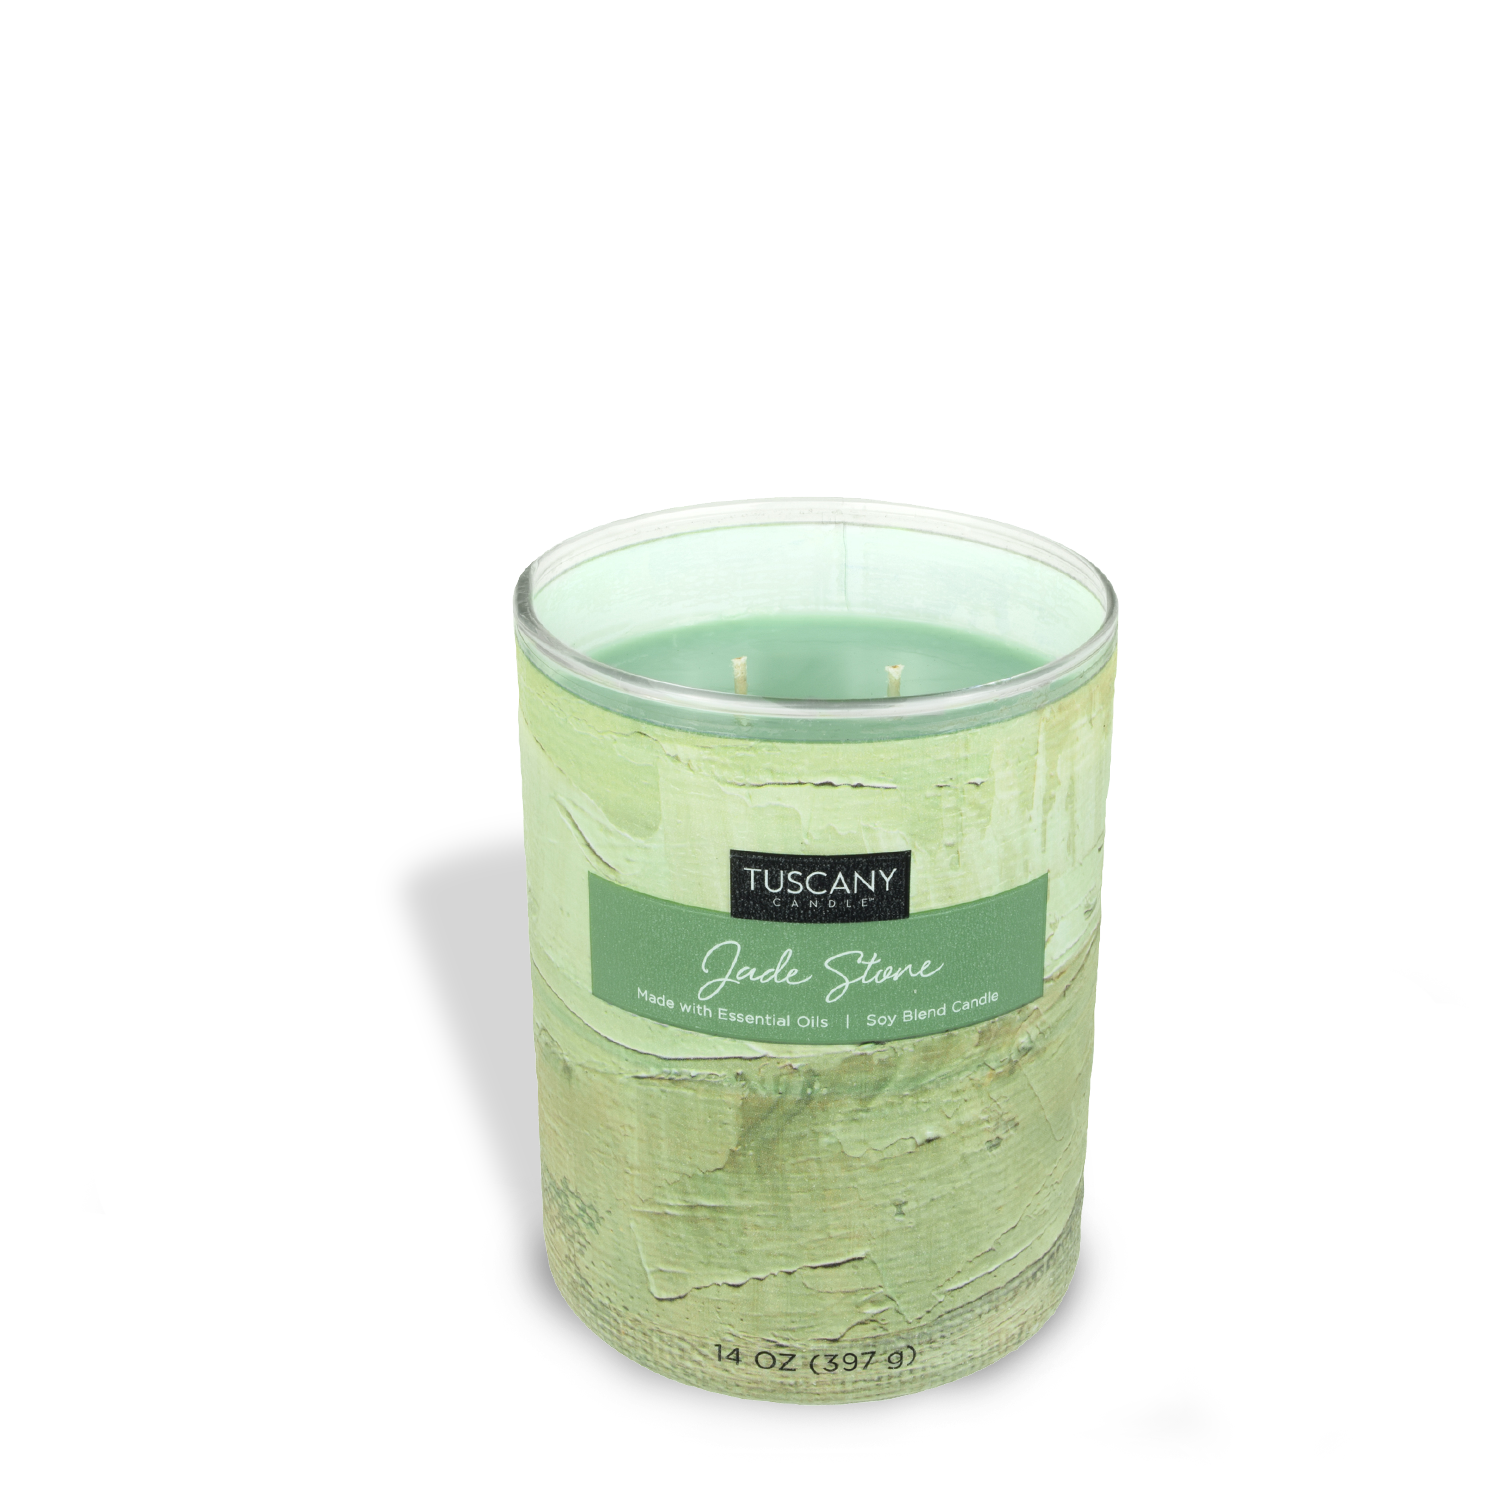 Elevated fragrance is captured in a Jade Stone scented jar candle (14 oz) from the Tuscany Candle Home Décor collection, beautifully showcased against a pristine white background.